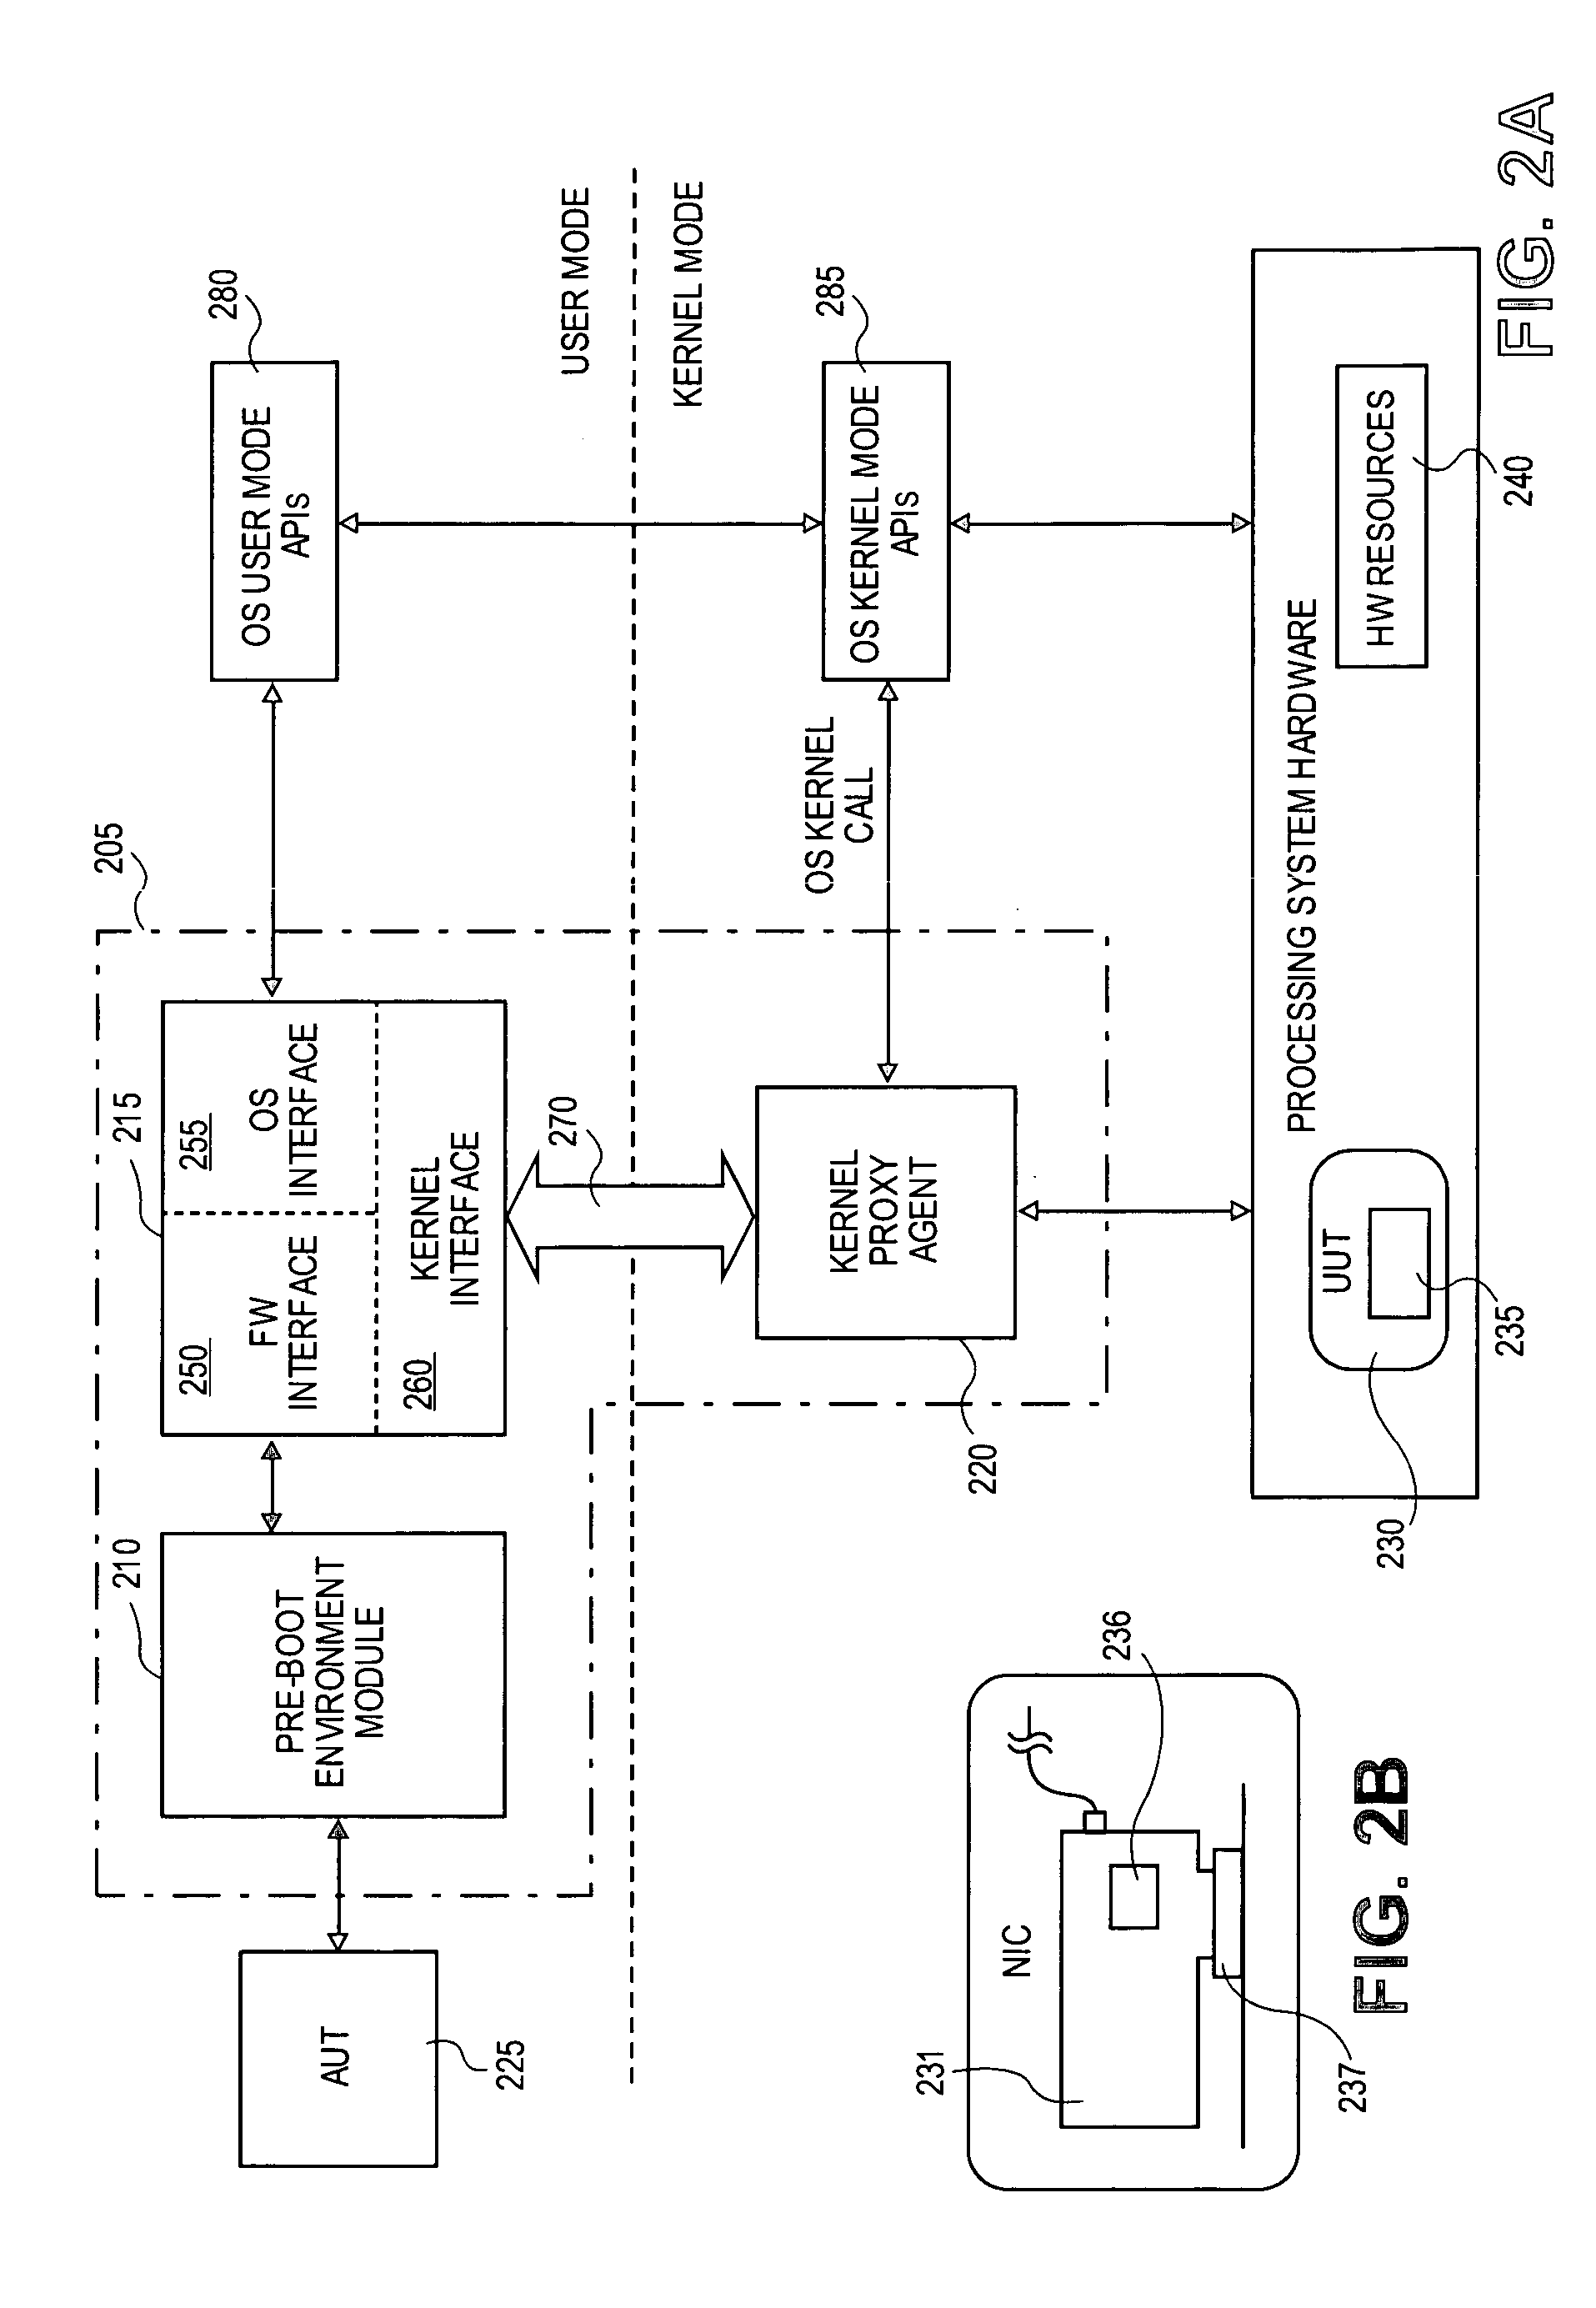 Firmware emulation environment for developing, debugging, and testing firmware components including option ROMs